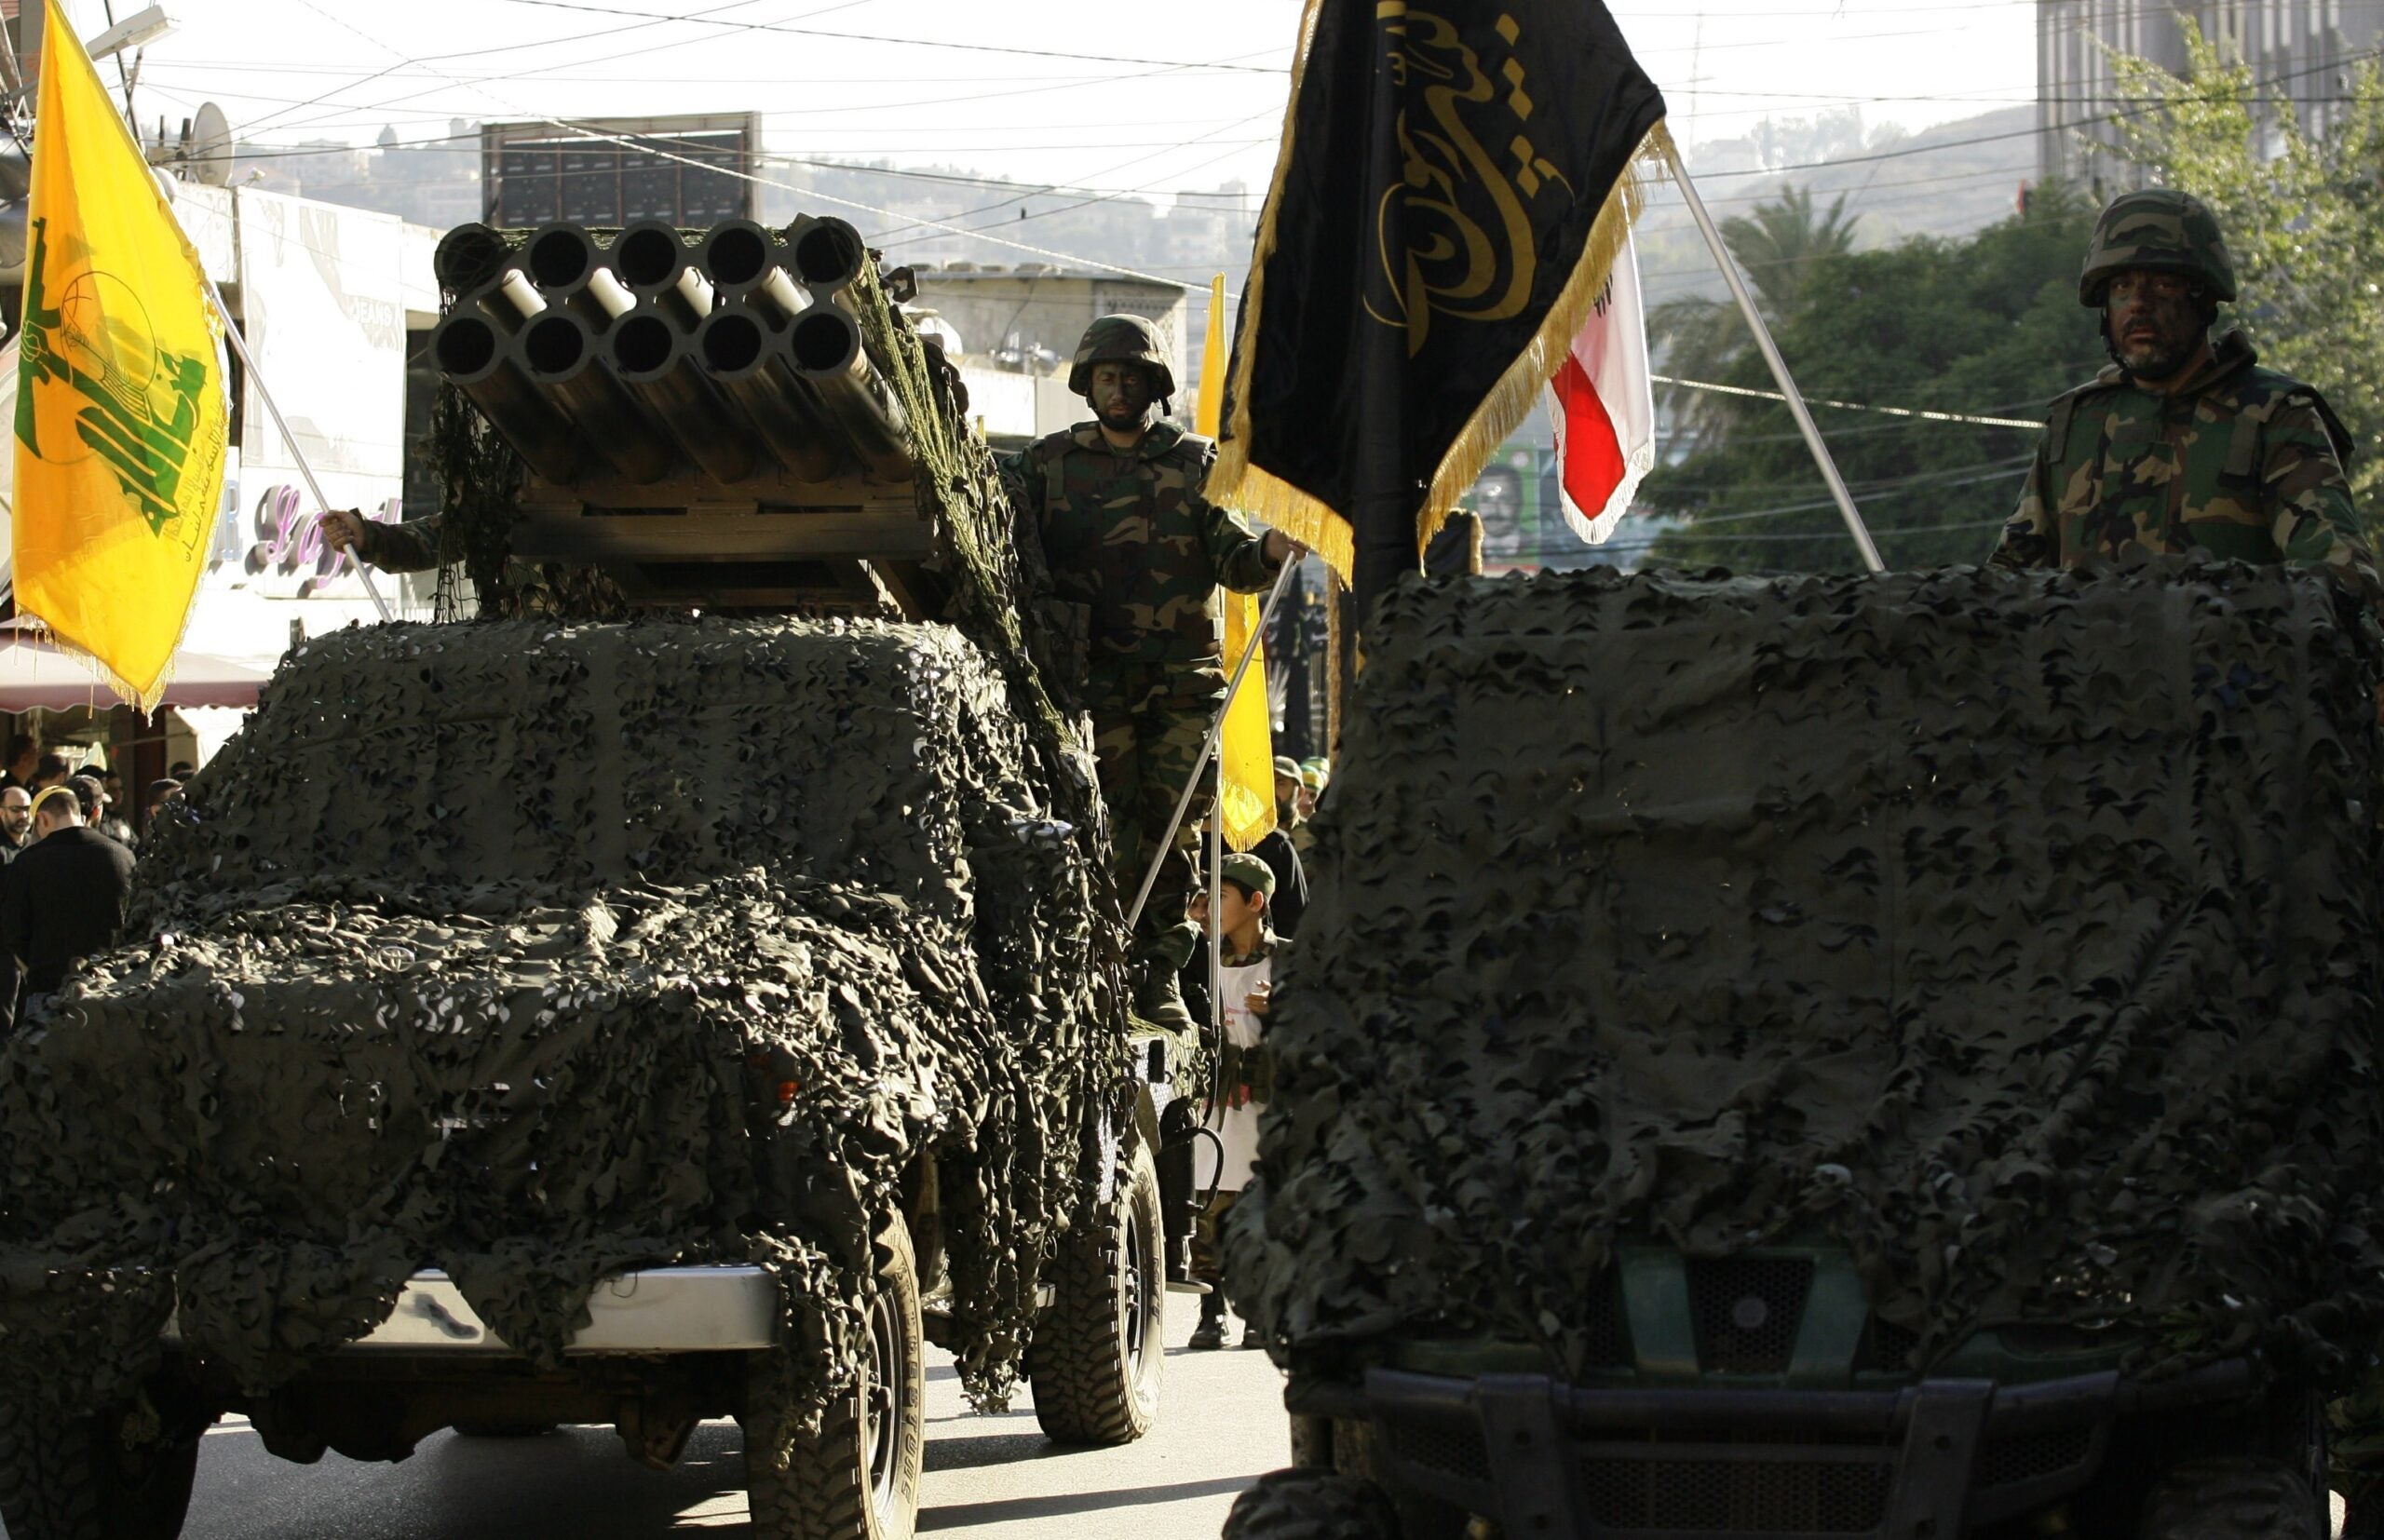 Members of Lebanon's militant Shiite Muslim movement Hezbollah stand on a pick-up truck mounted with a multiple rocket launcher as they take part in a parade in the southern city of Nabatiyeh on November 7, 2014, to mark the 13th day of Ashura, where believers mourn the killing of the Prophet Mohammed's grandson, Imam Hussein, during the battle of Karbala in central Iraq in the seventh century. AFP PHOTO / MAHMOUD ZAYYAT        (Photo credit should read MAHMOUD ZAYYAT/AFP via Getty Images)